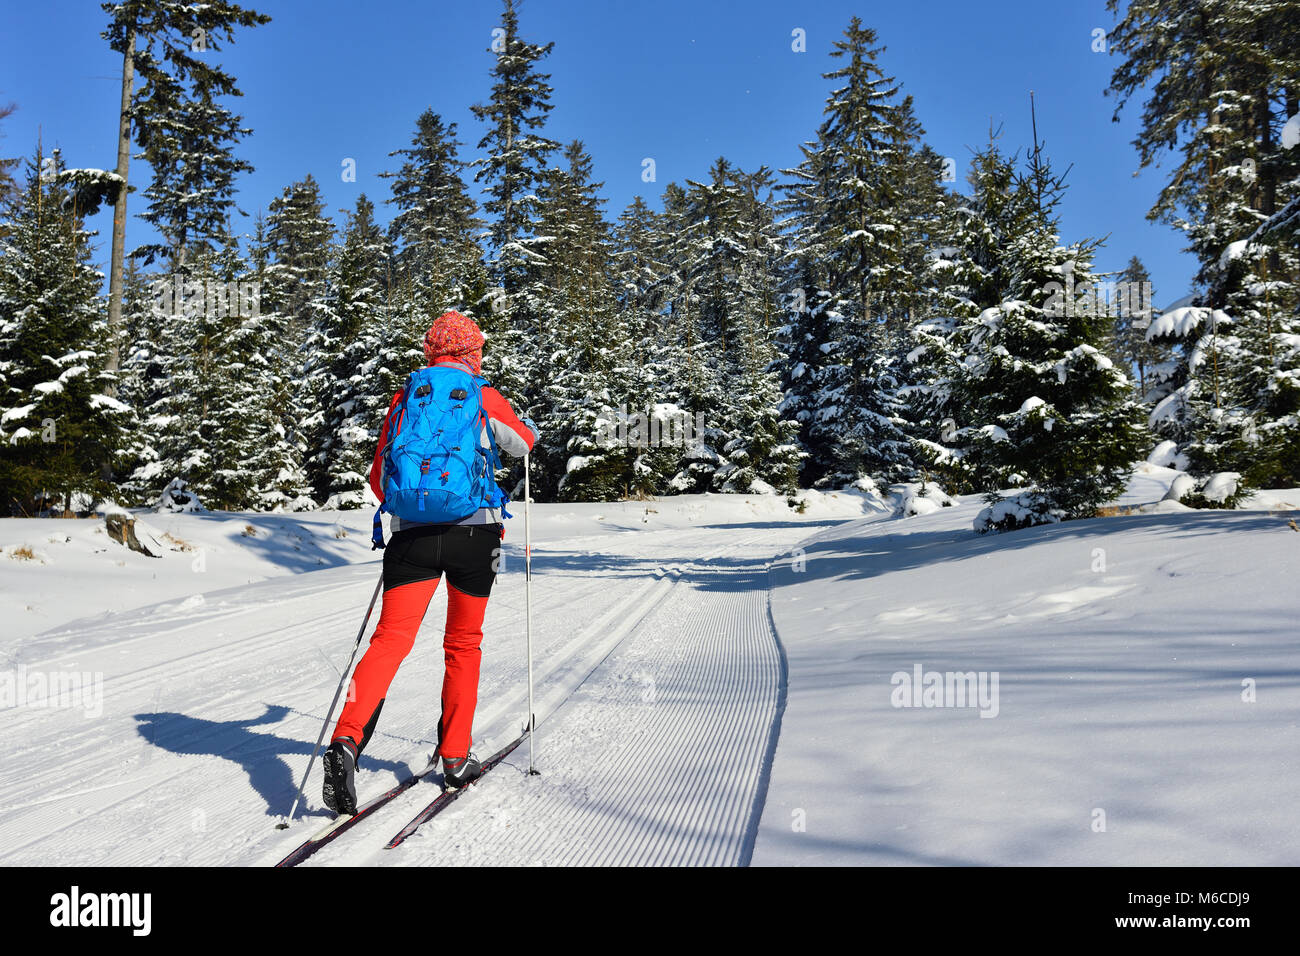 Woman in the colour dress on cross-country skis amongst trees coated ...